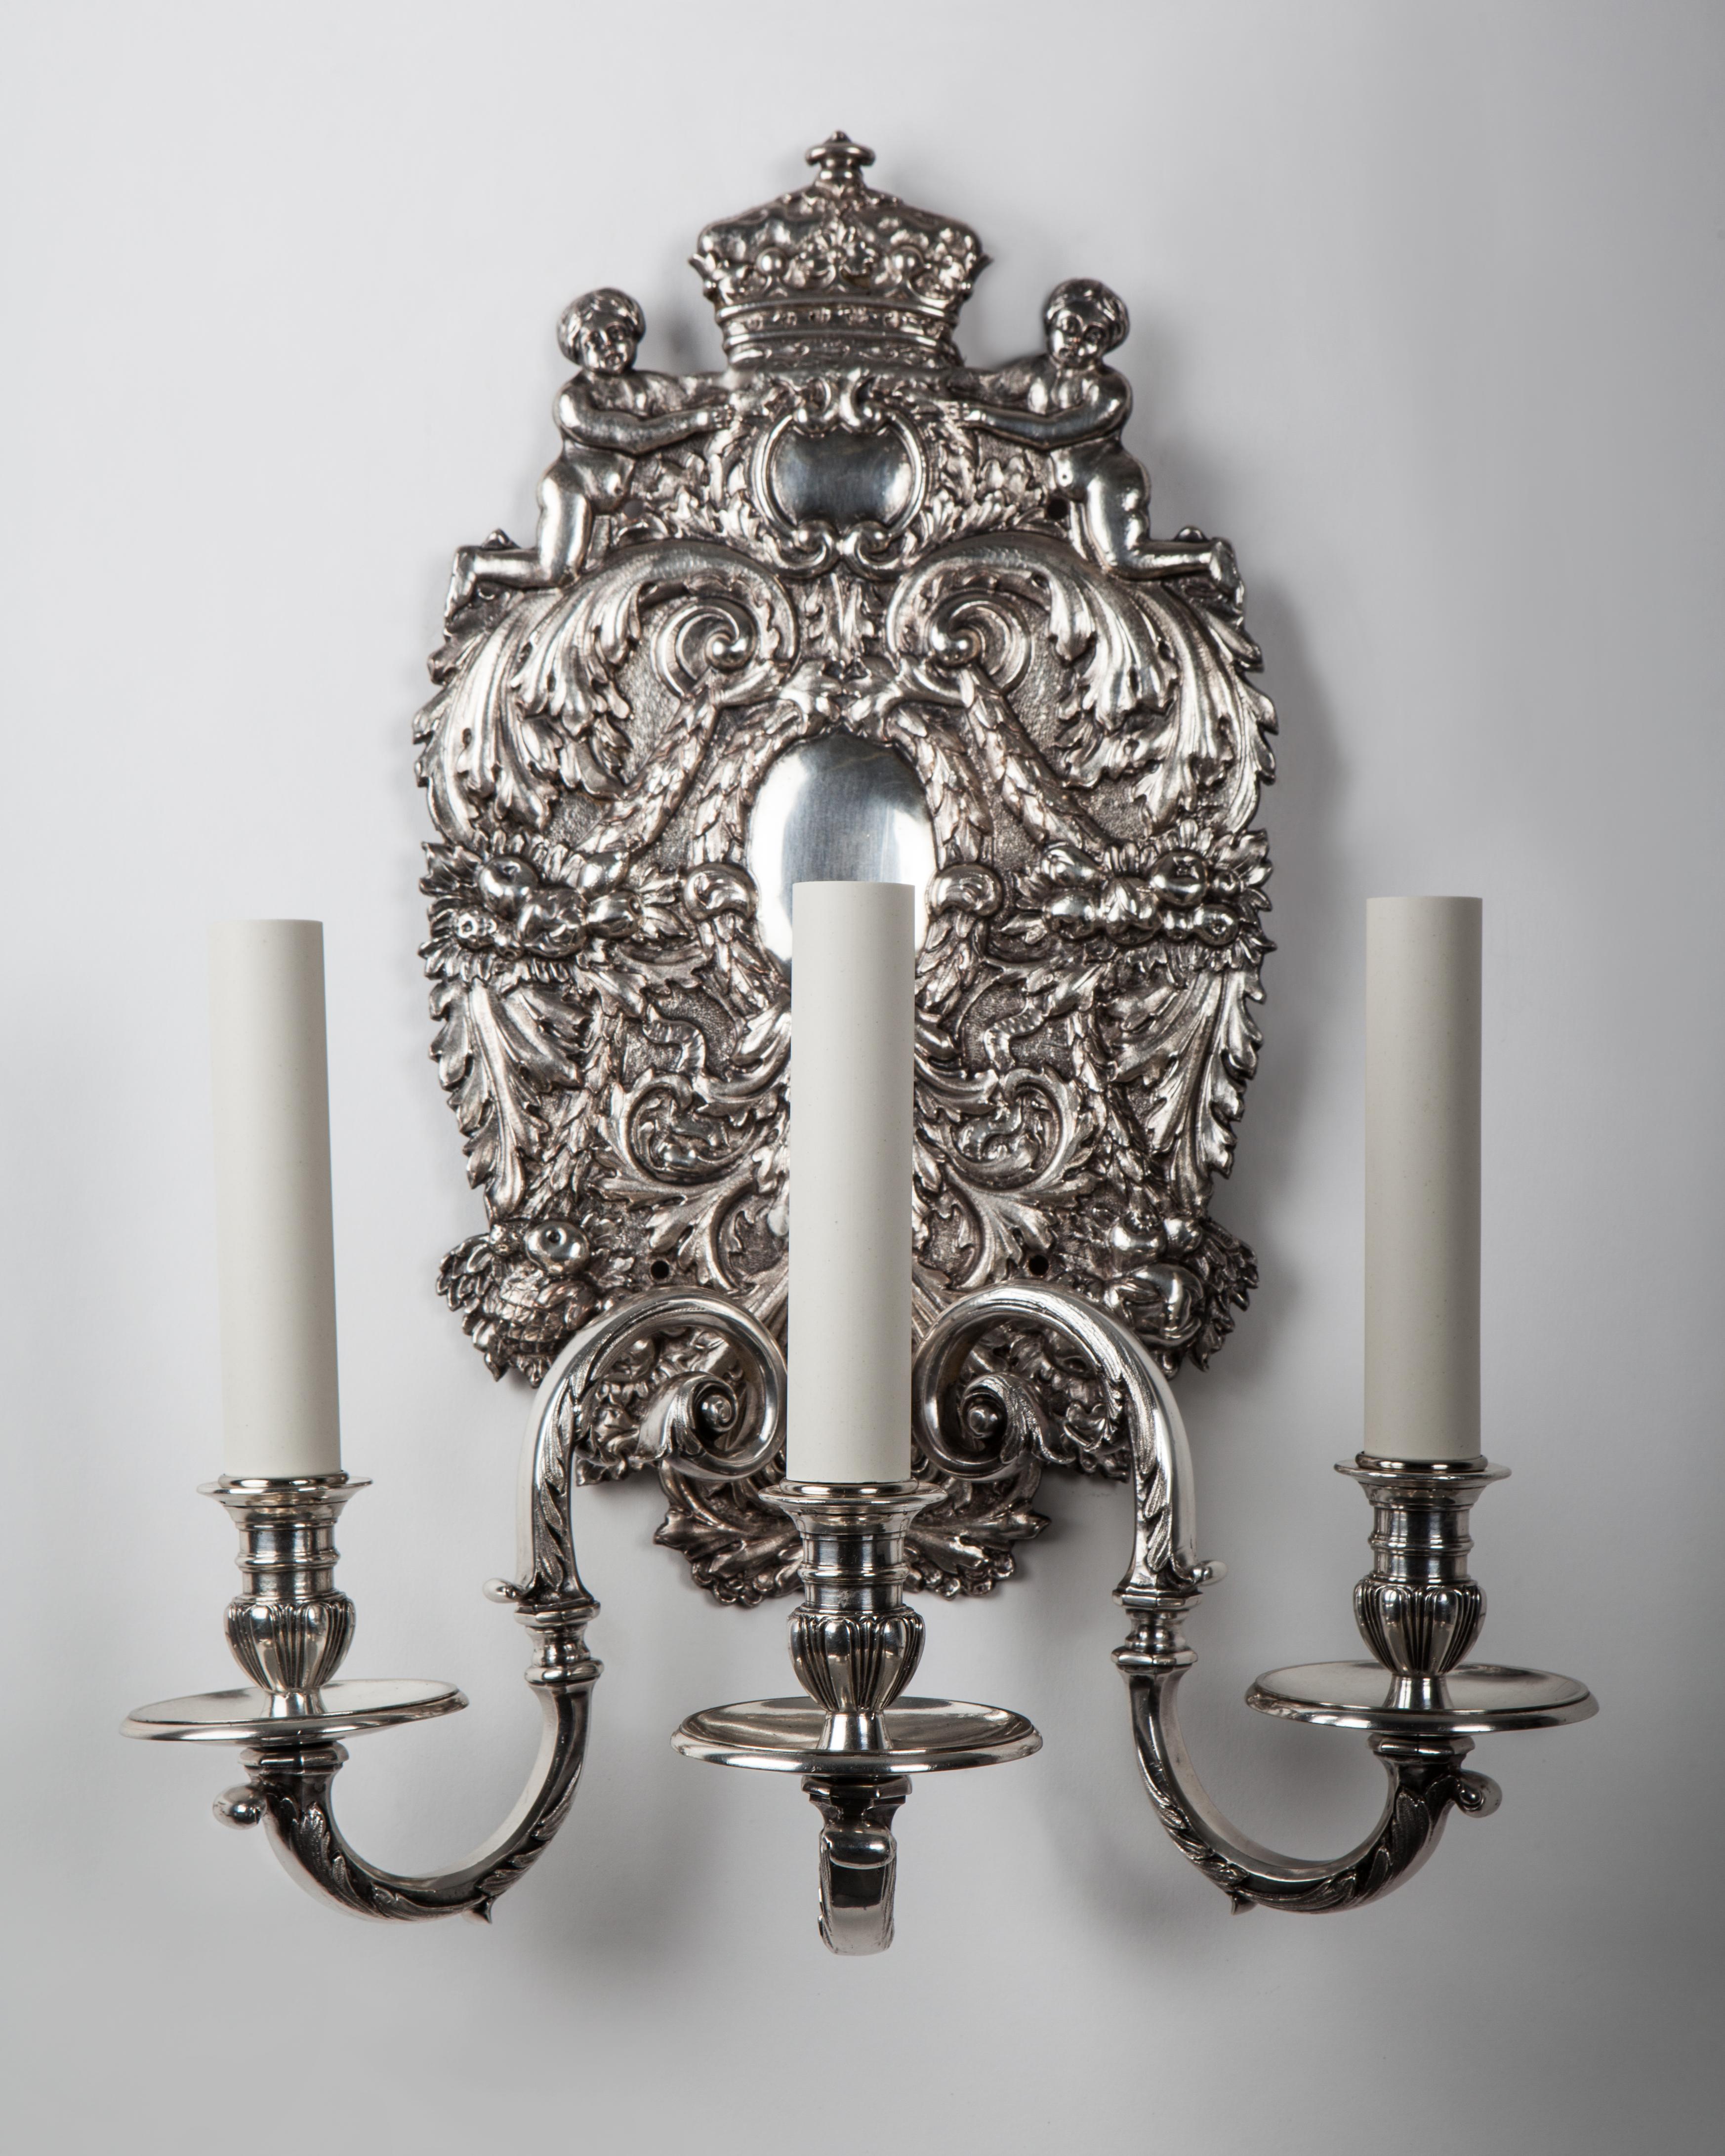 AIS2948
A pair of antique three arm sconces in silverplate over bronze with George II style bas-relief backplates having cherubs holding crowns and foliate details. The S-curving arms supporting gadrooned waxpans and candle cups. Circa